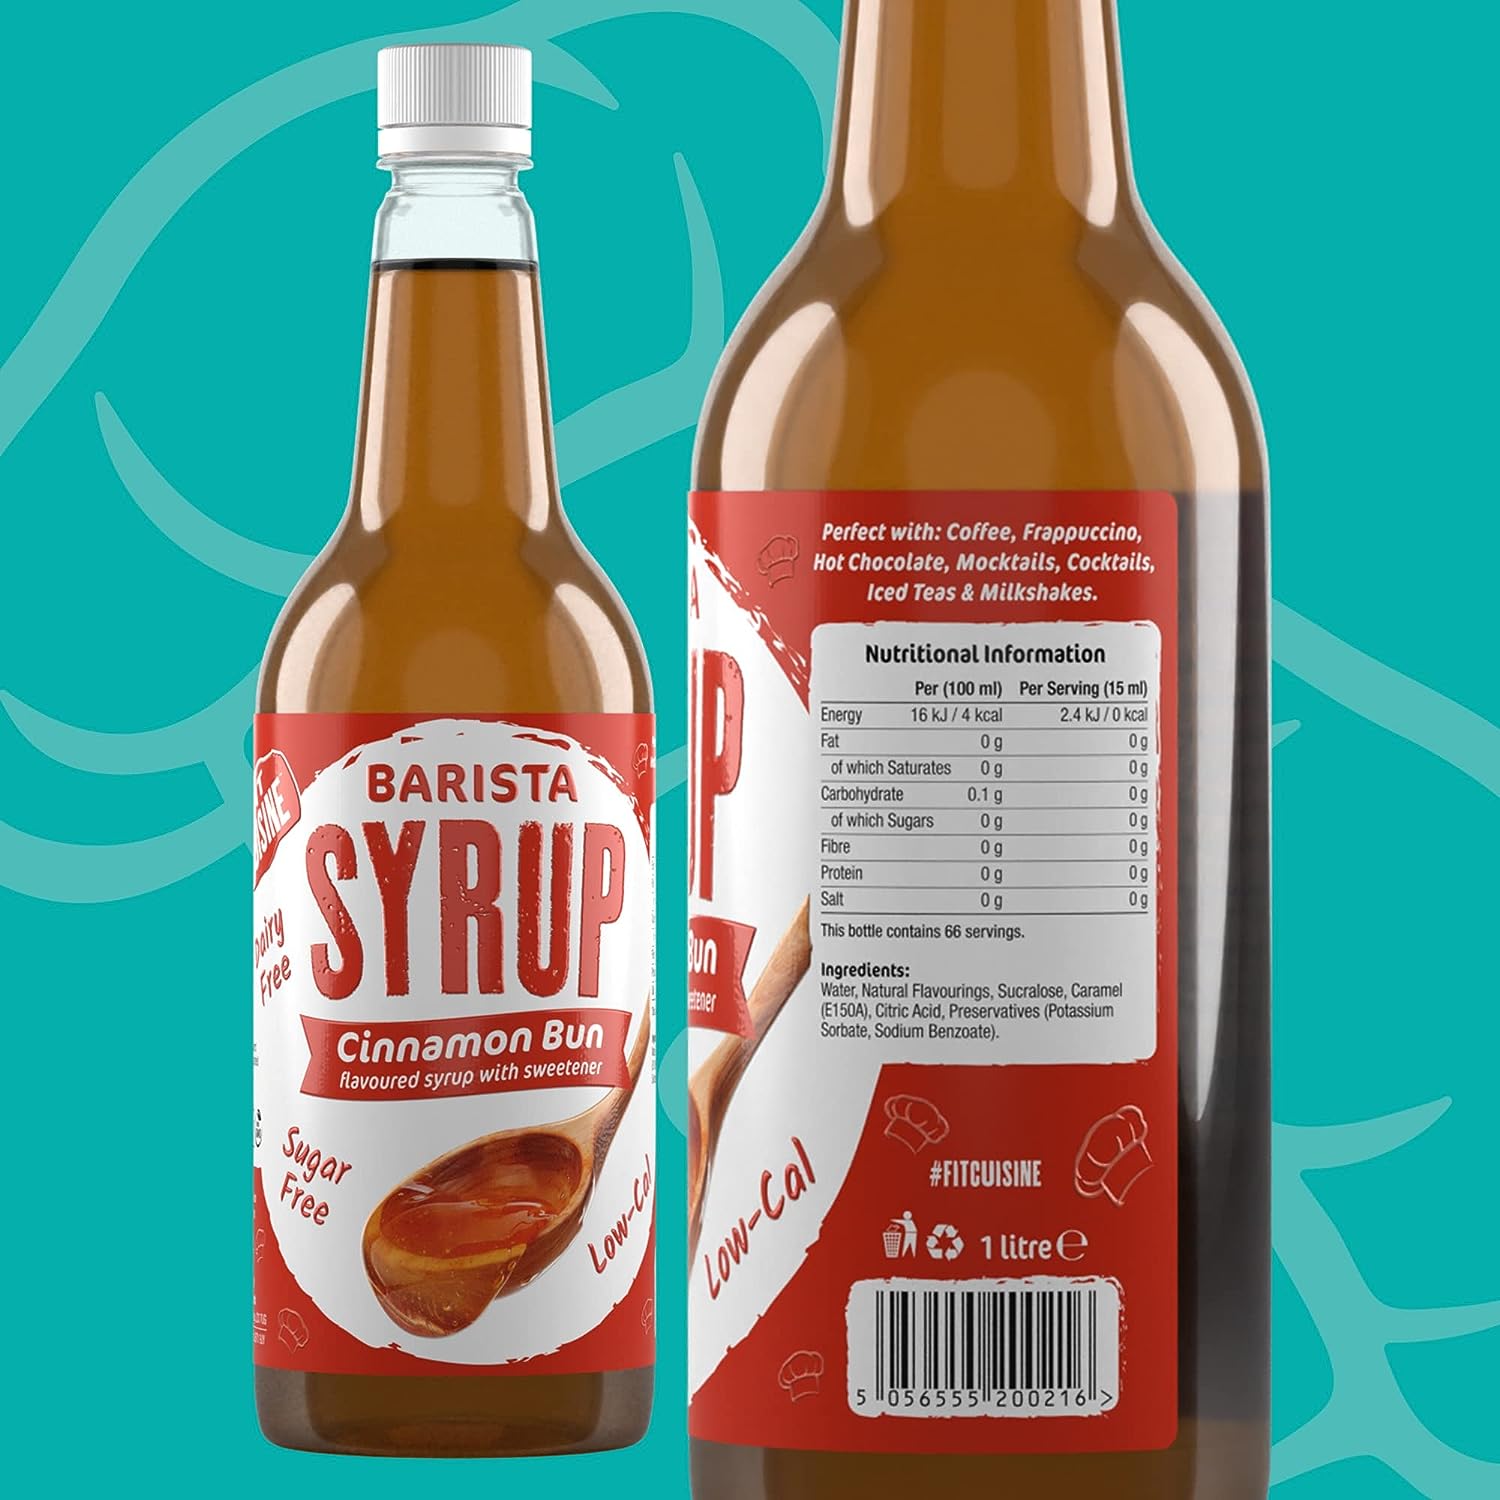 Fit Cuisine Coffee Syrups - Barista Syrup for Coffee Drinks, Low Calorie, Sugar Free - Cinnamon Bun 1 Litre